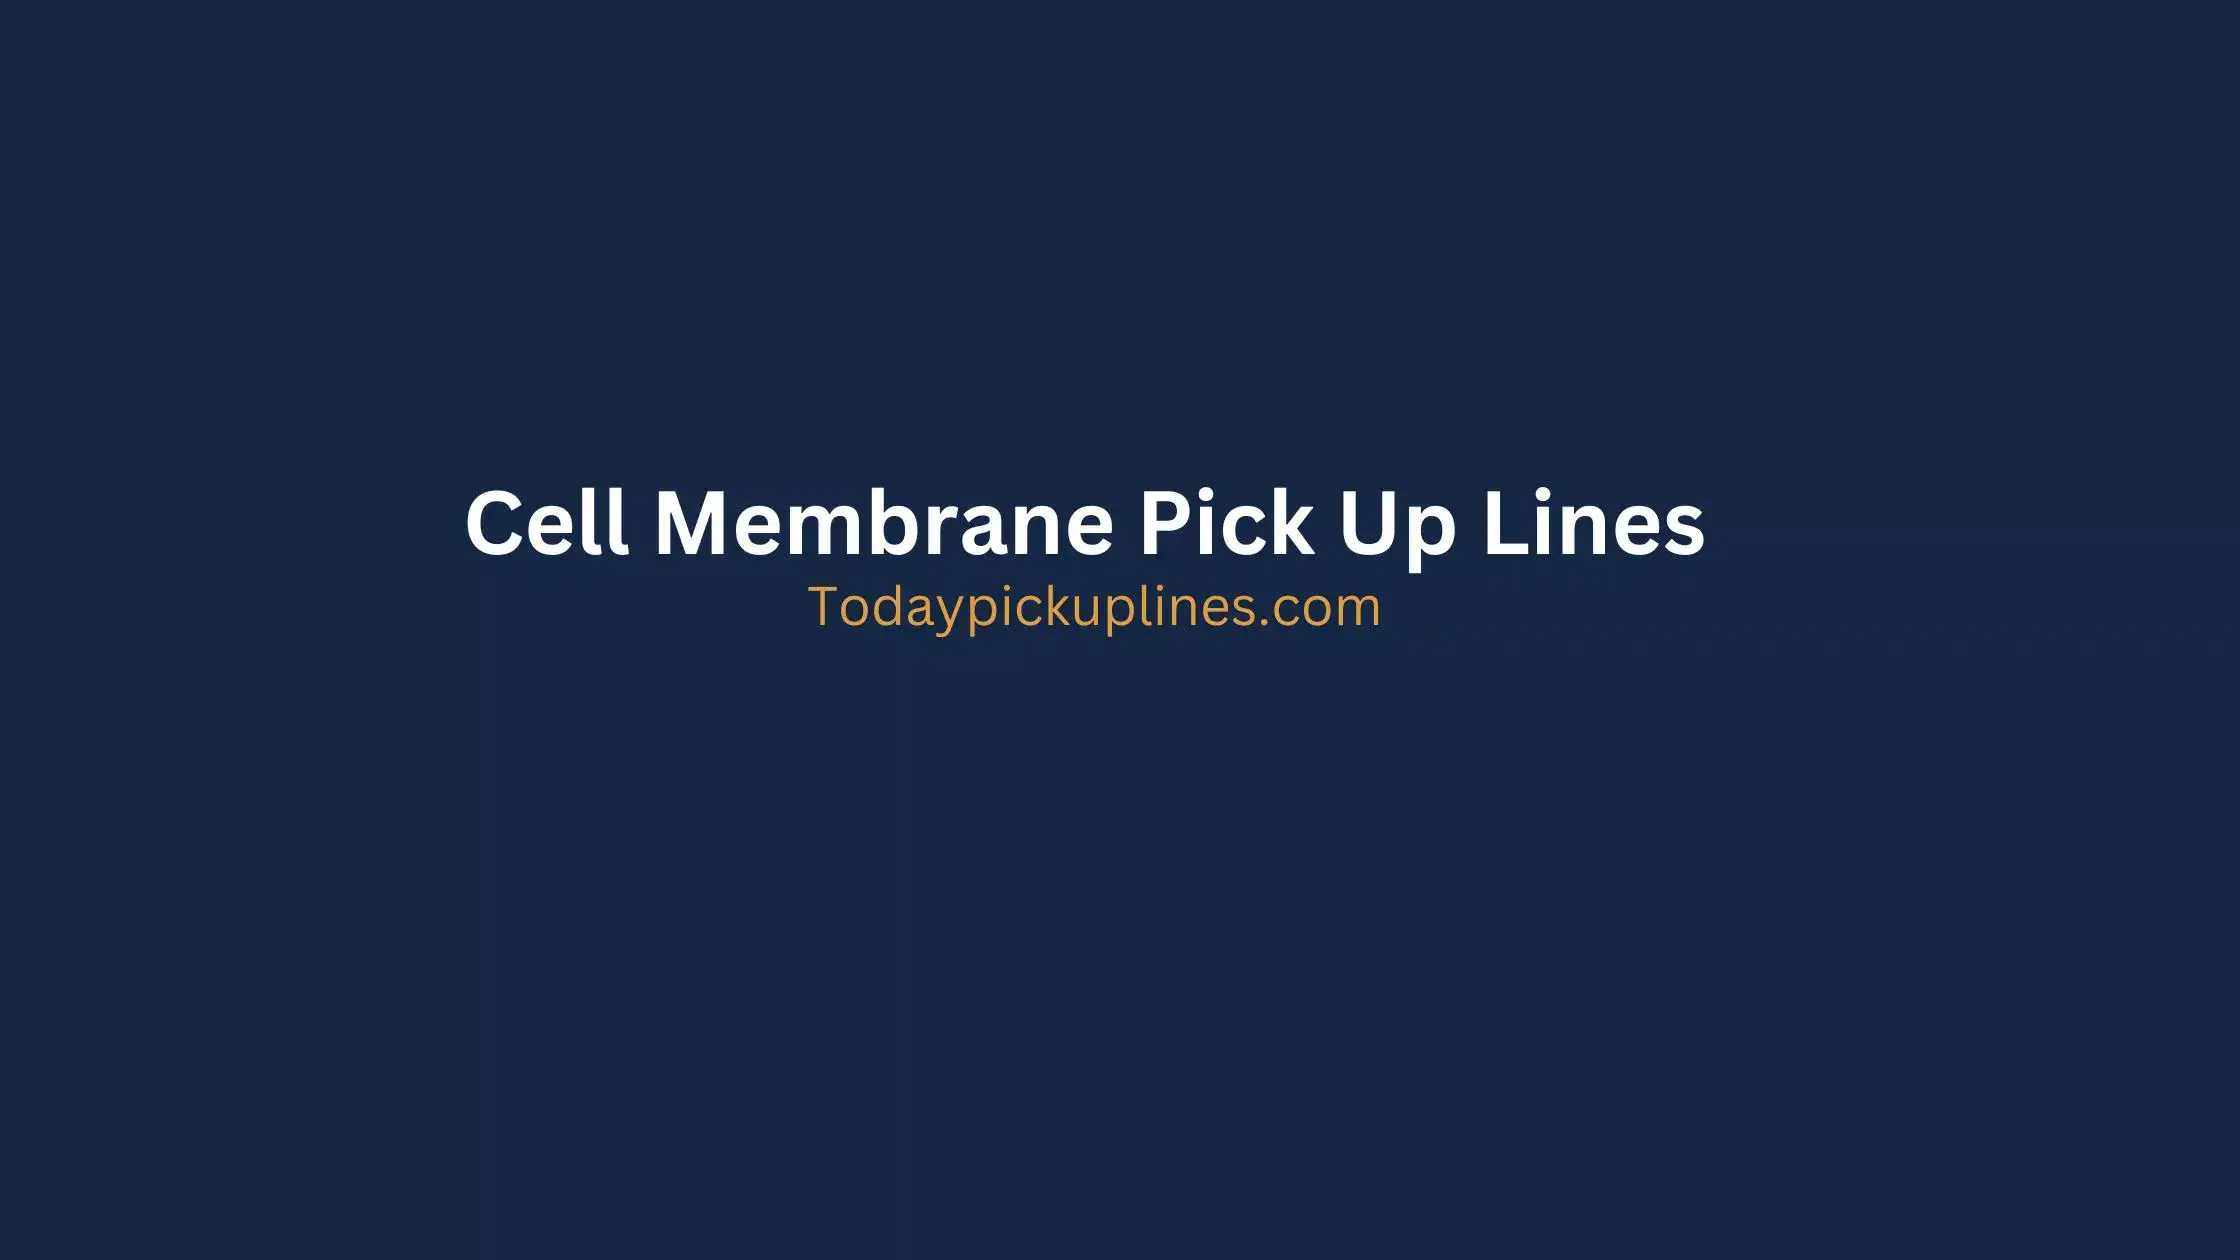 Cell Membrane Pick Up Lines